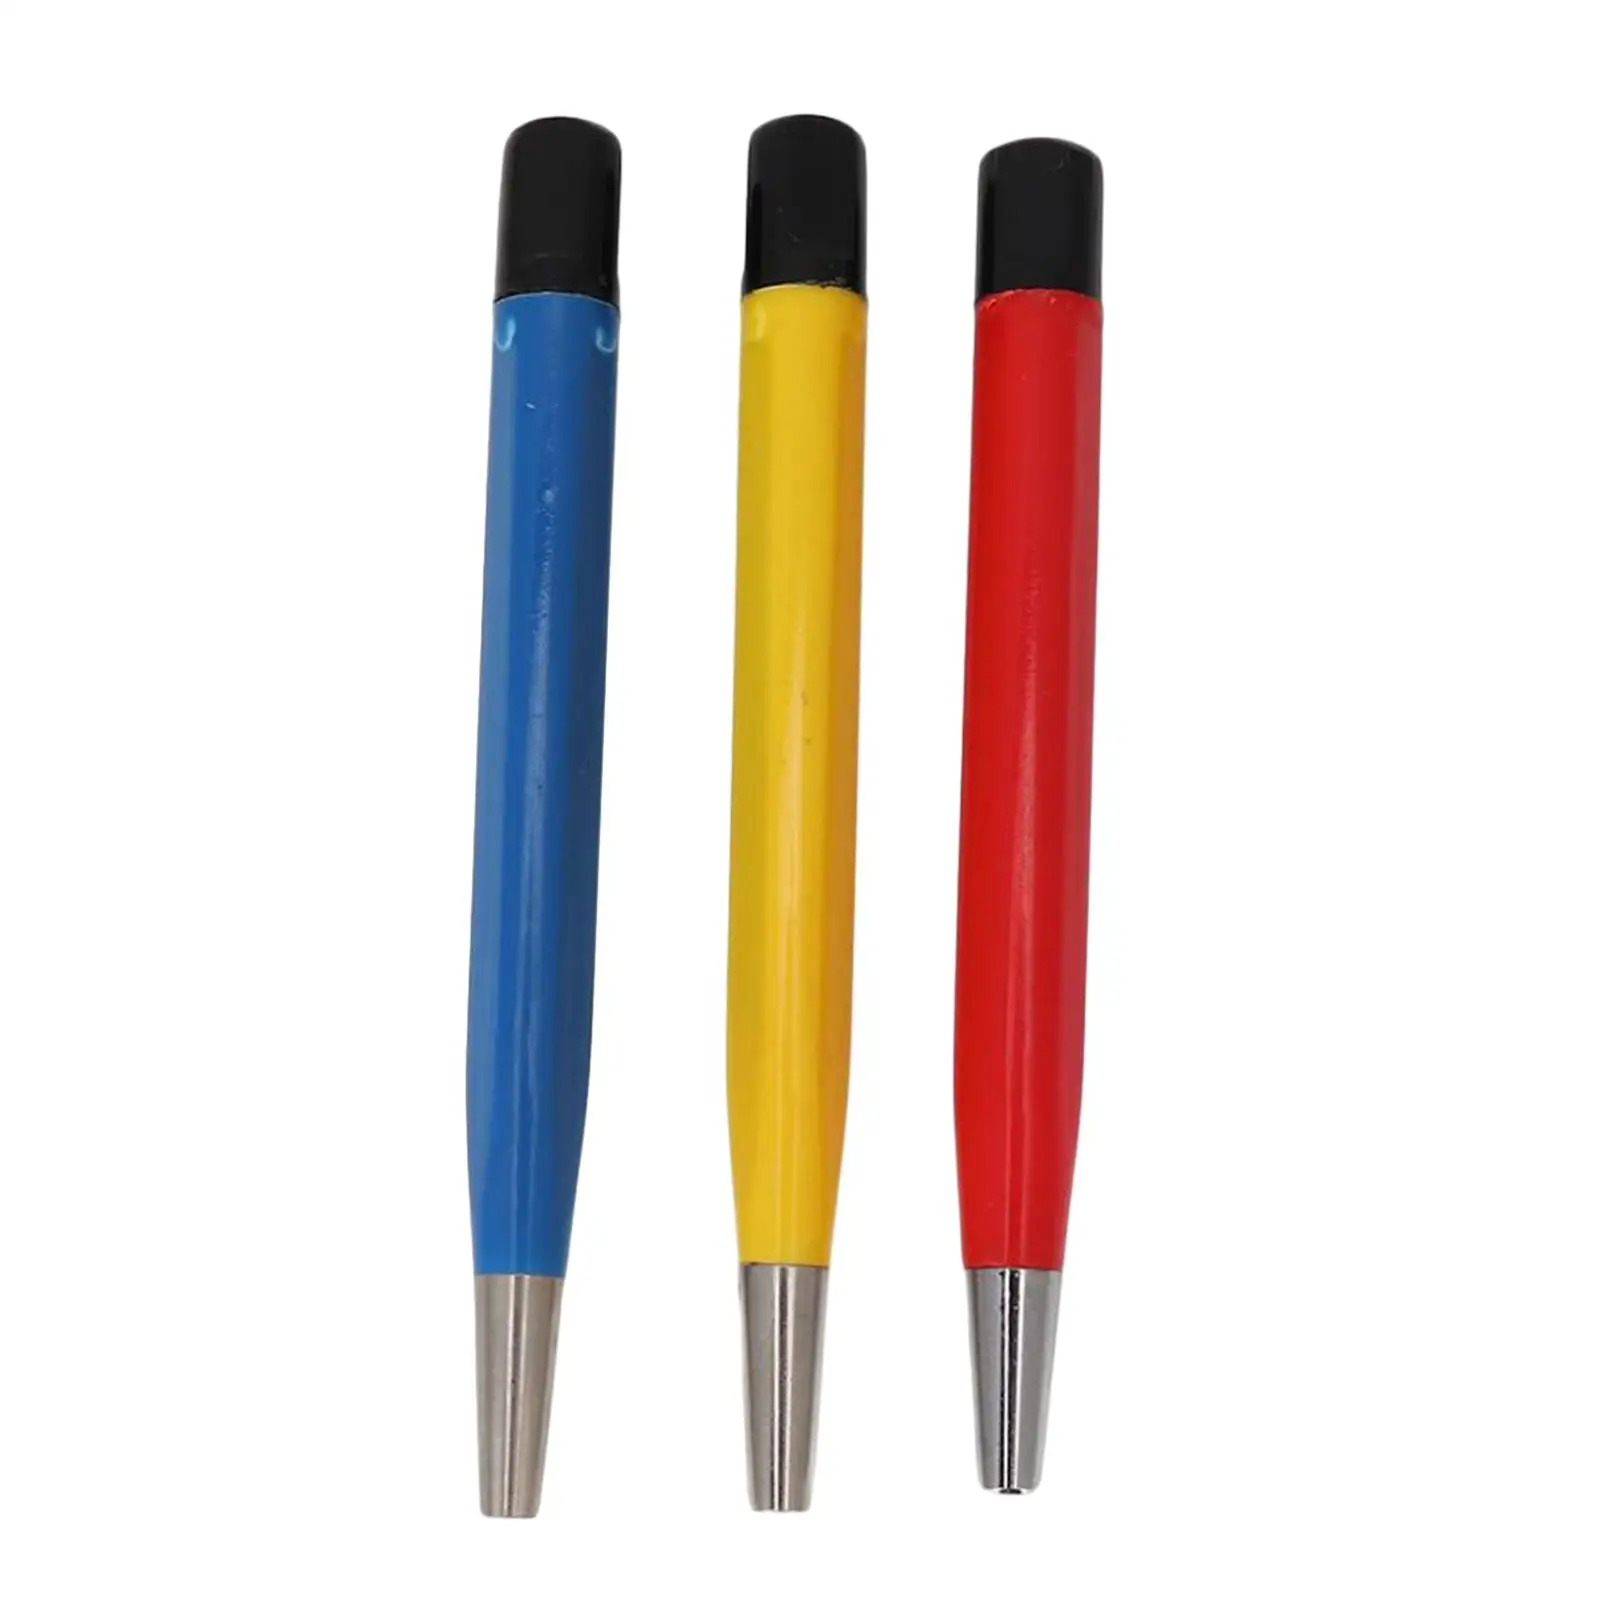 3x Scratch Brush Pen Set Dirt Remover for Electrical Circuit Boards Jewelry